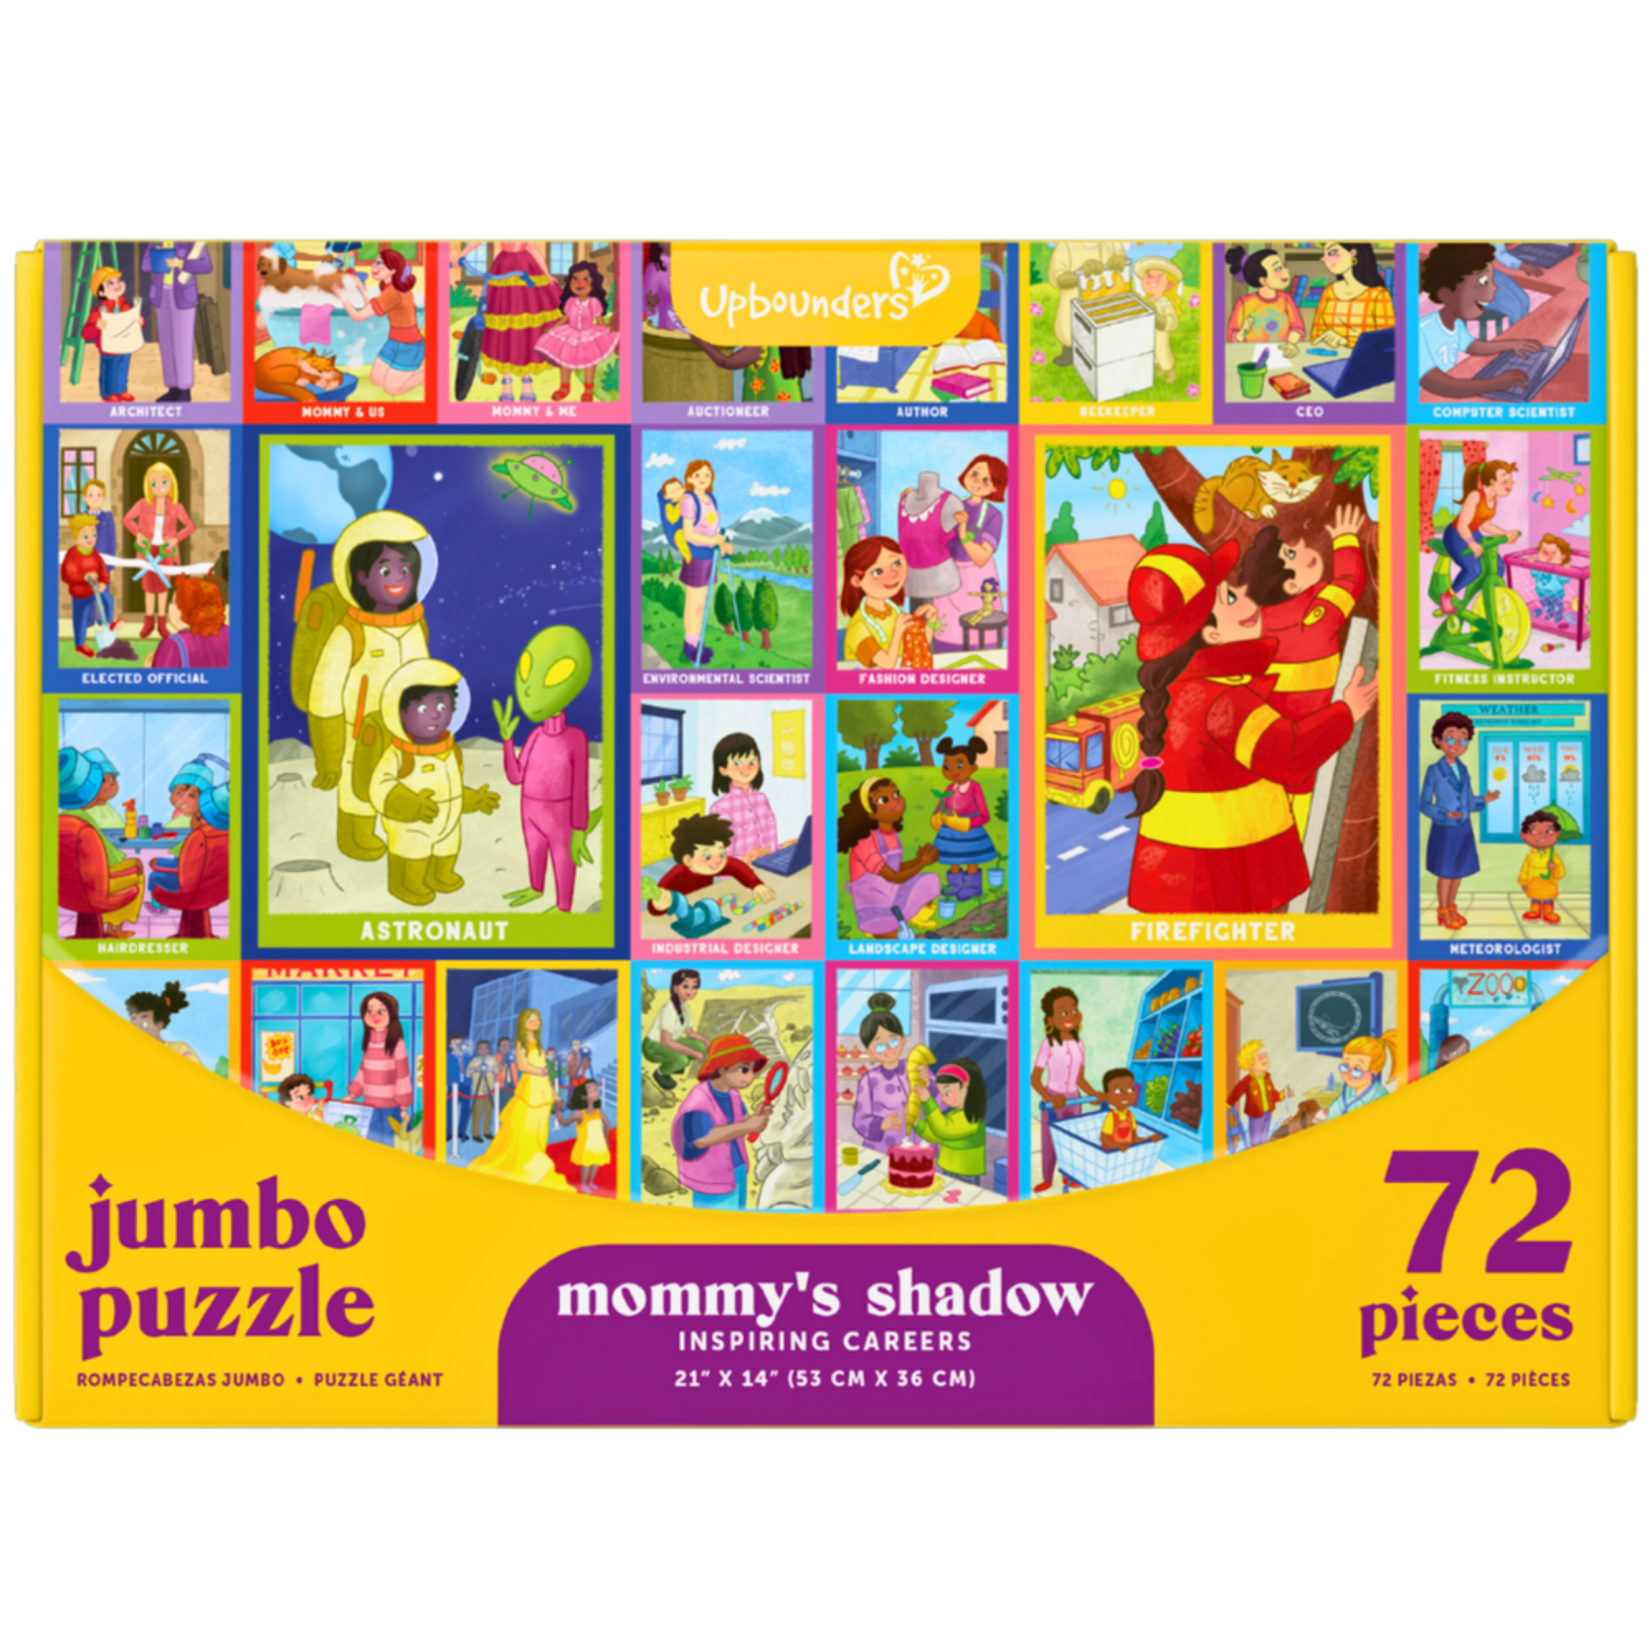 Upbounders Inspiring Careers, Mommy’s Shadow 72-Piece Jigsaw Puzzle